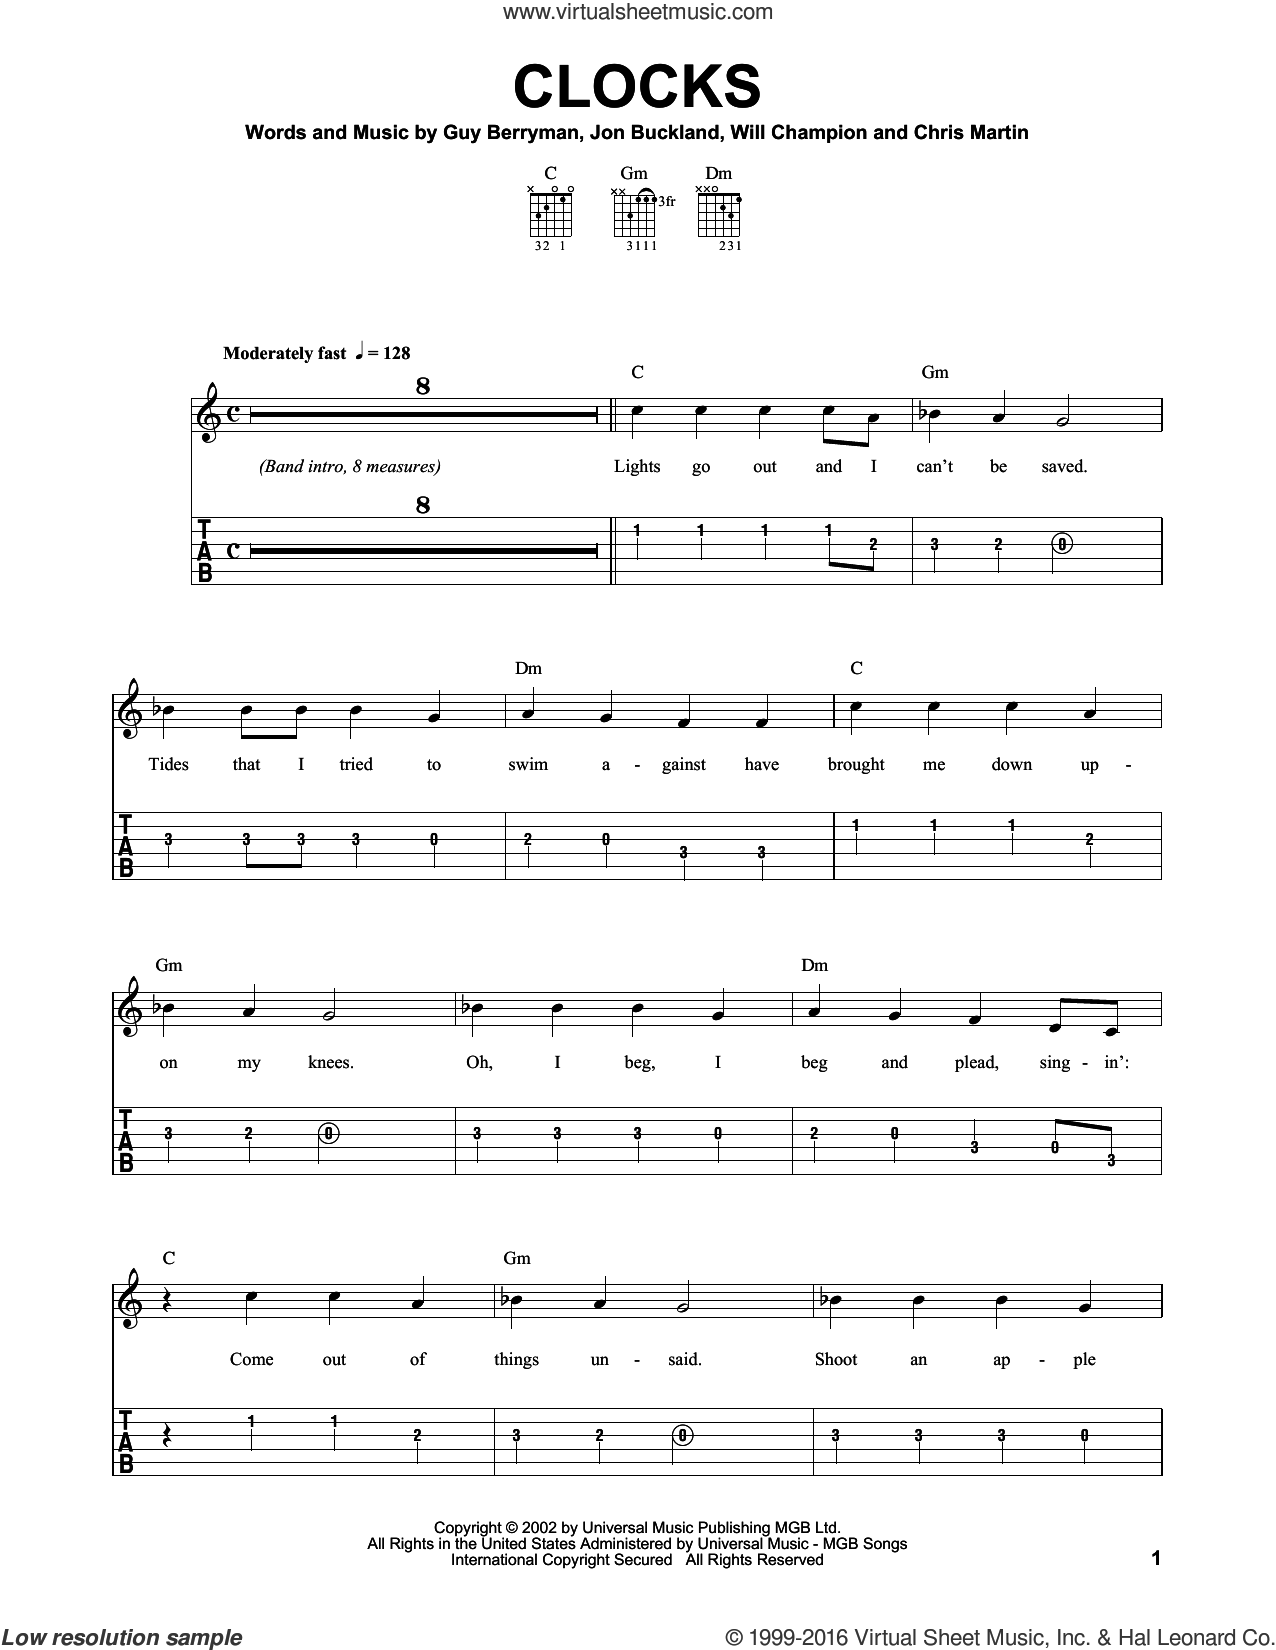 Coldplay - Clocks sheet music for guitar solo (easy tablature)